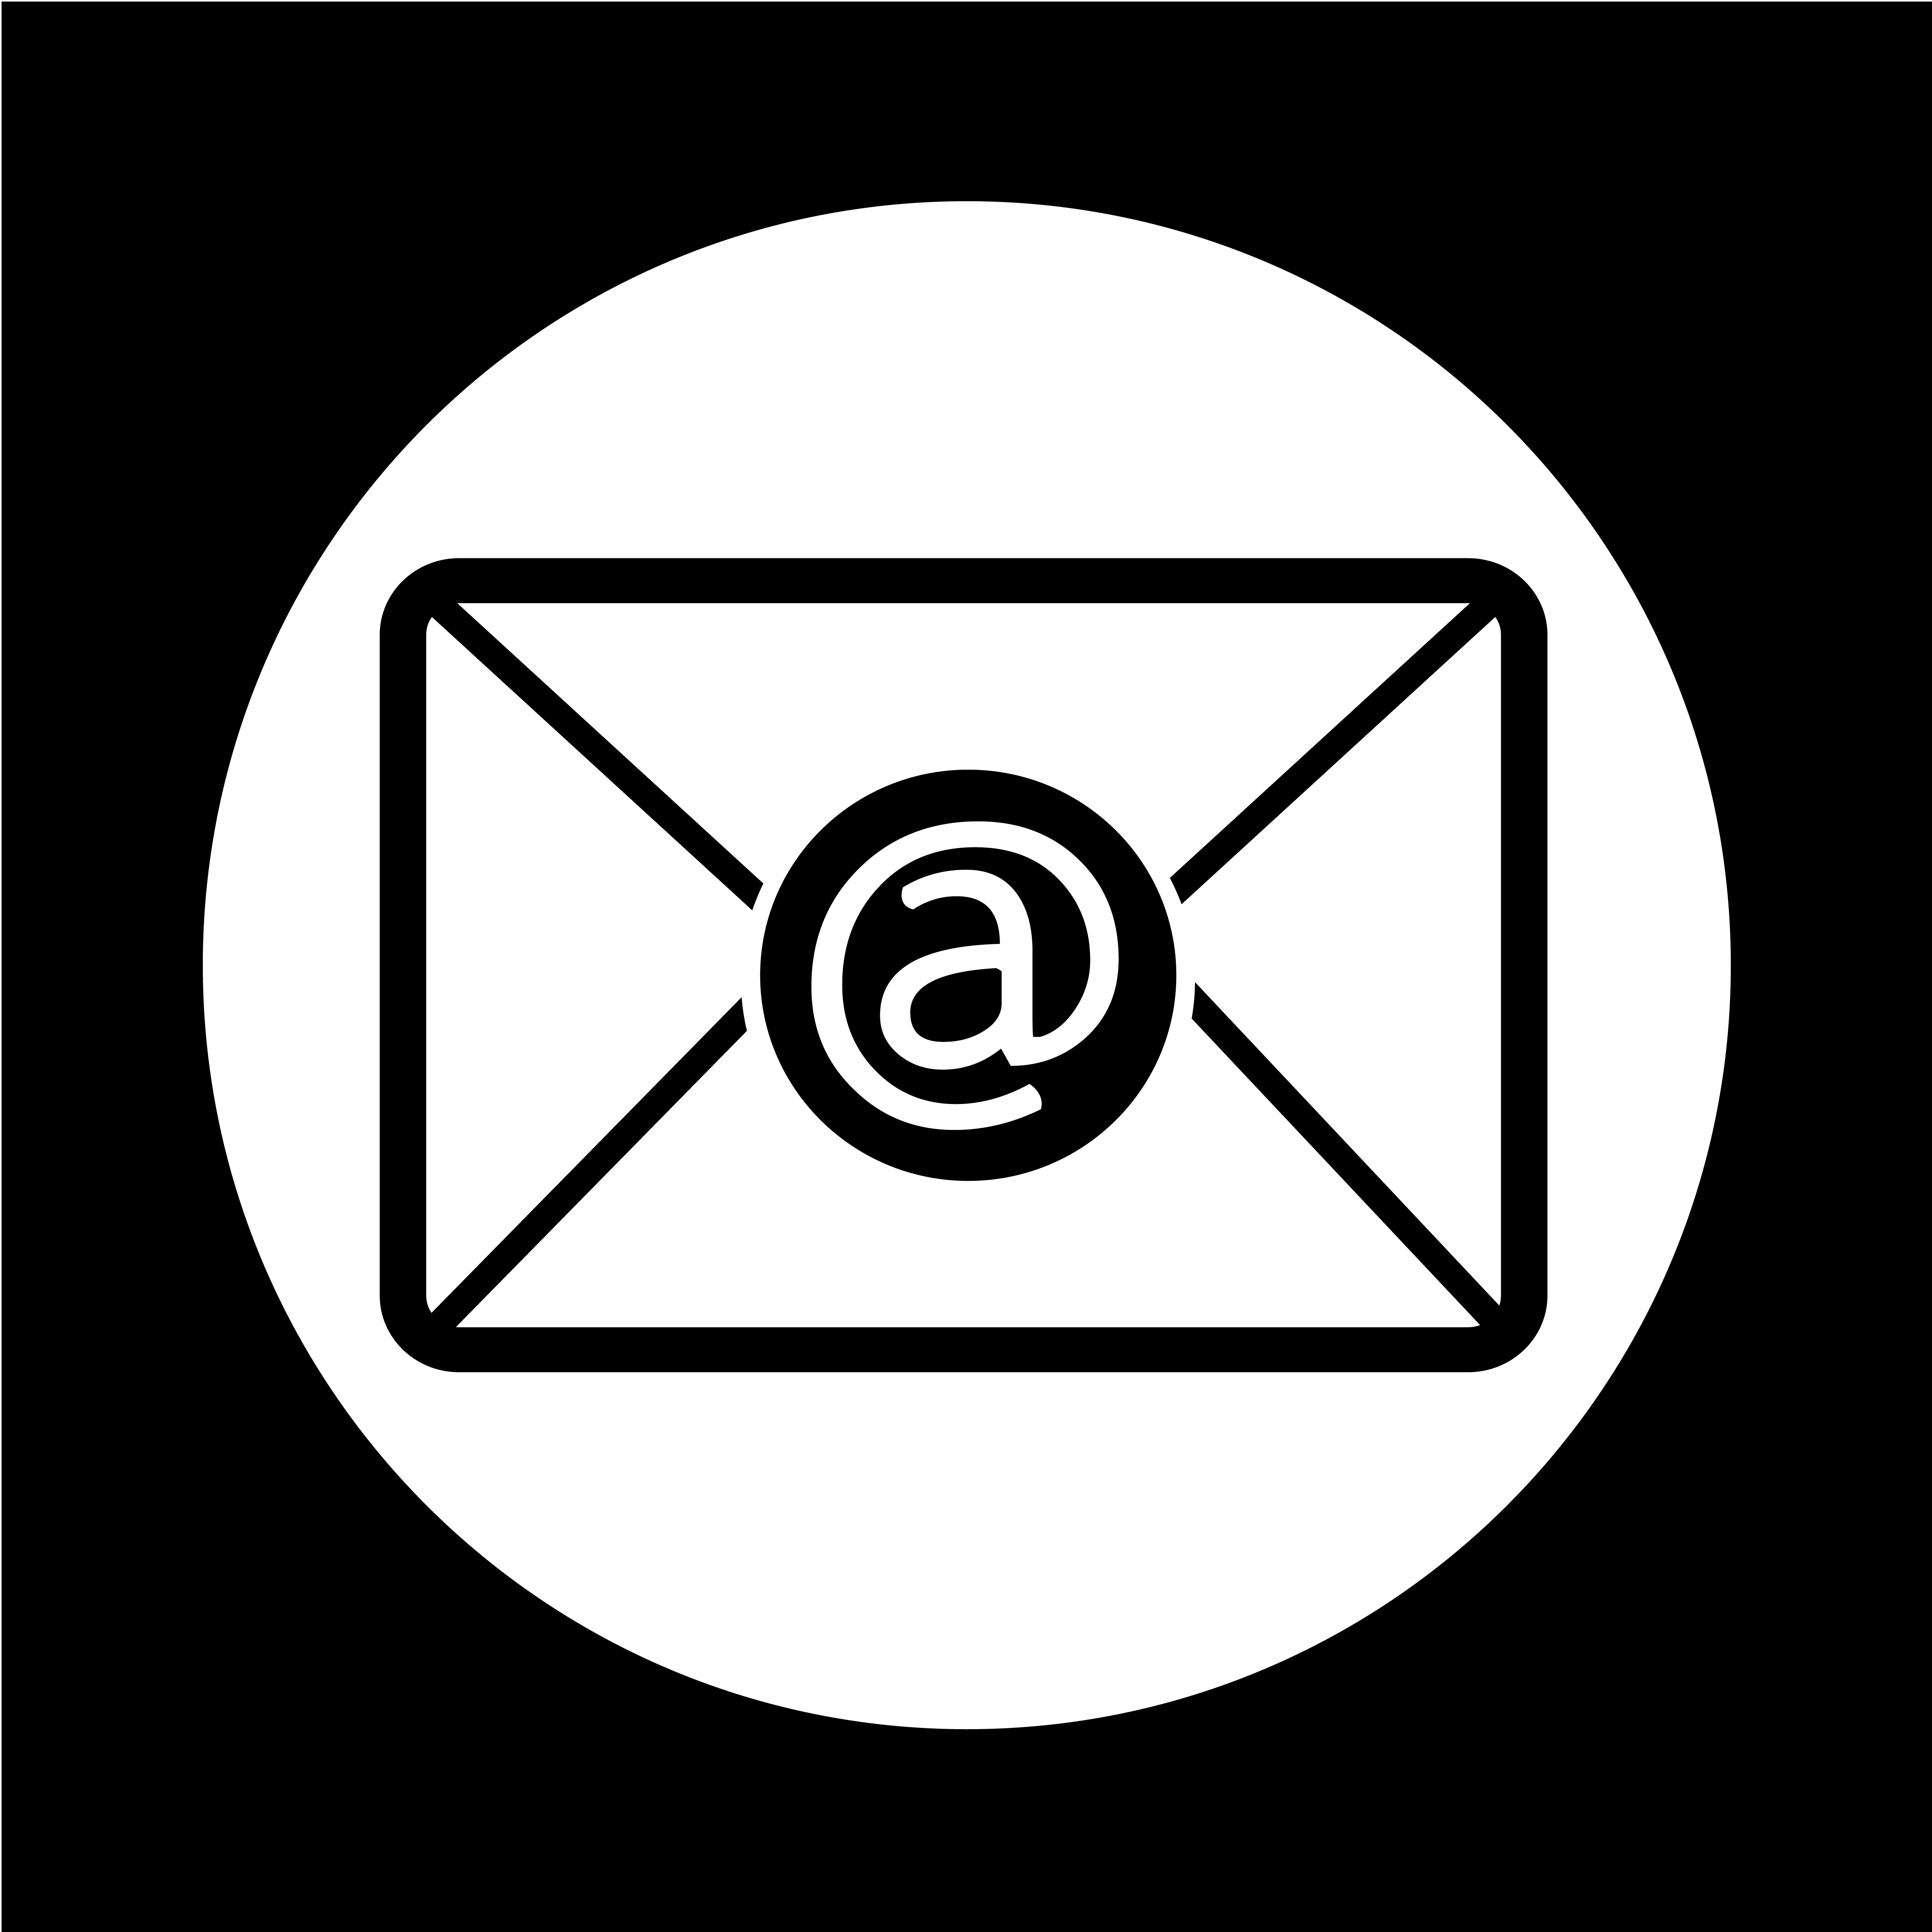 email symbol icon 564347 - Download Free Vectors, Clipart ...